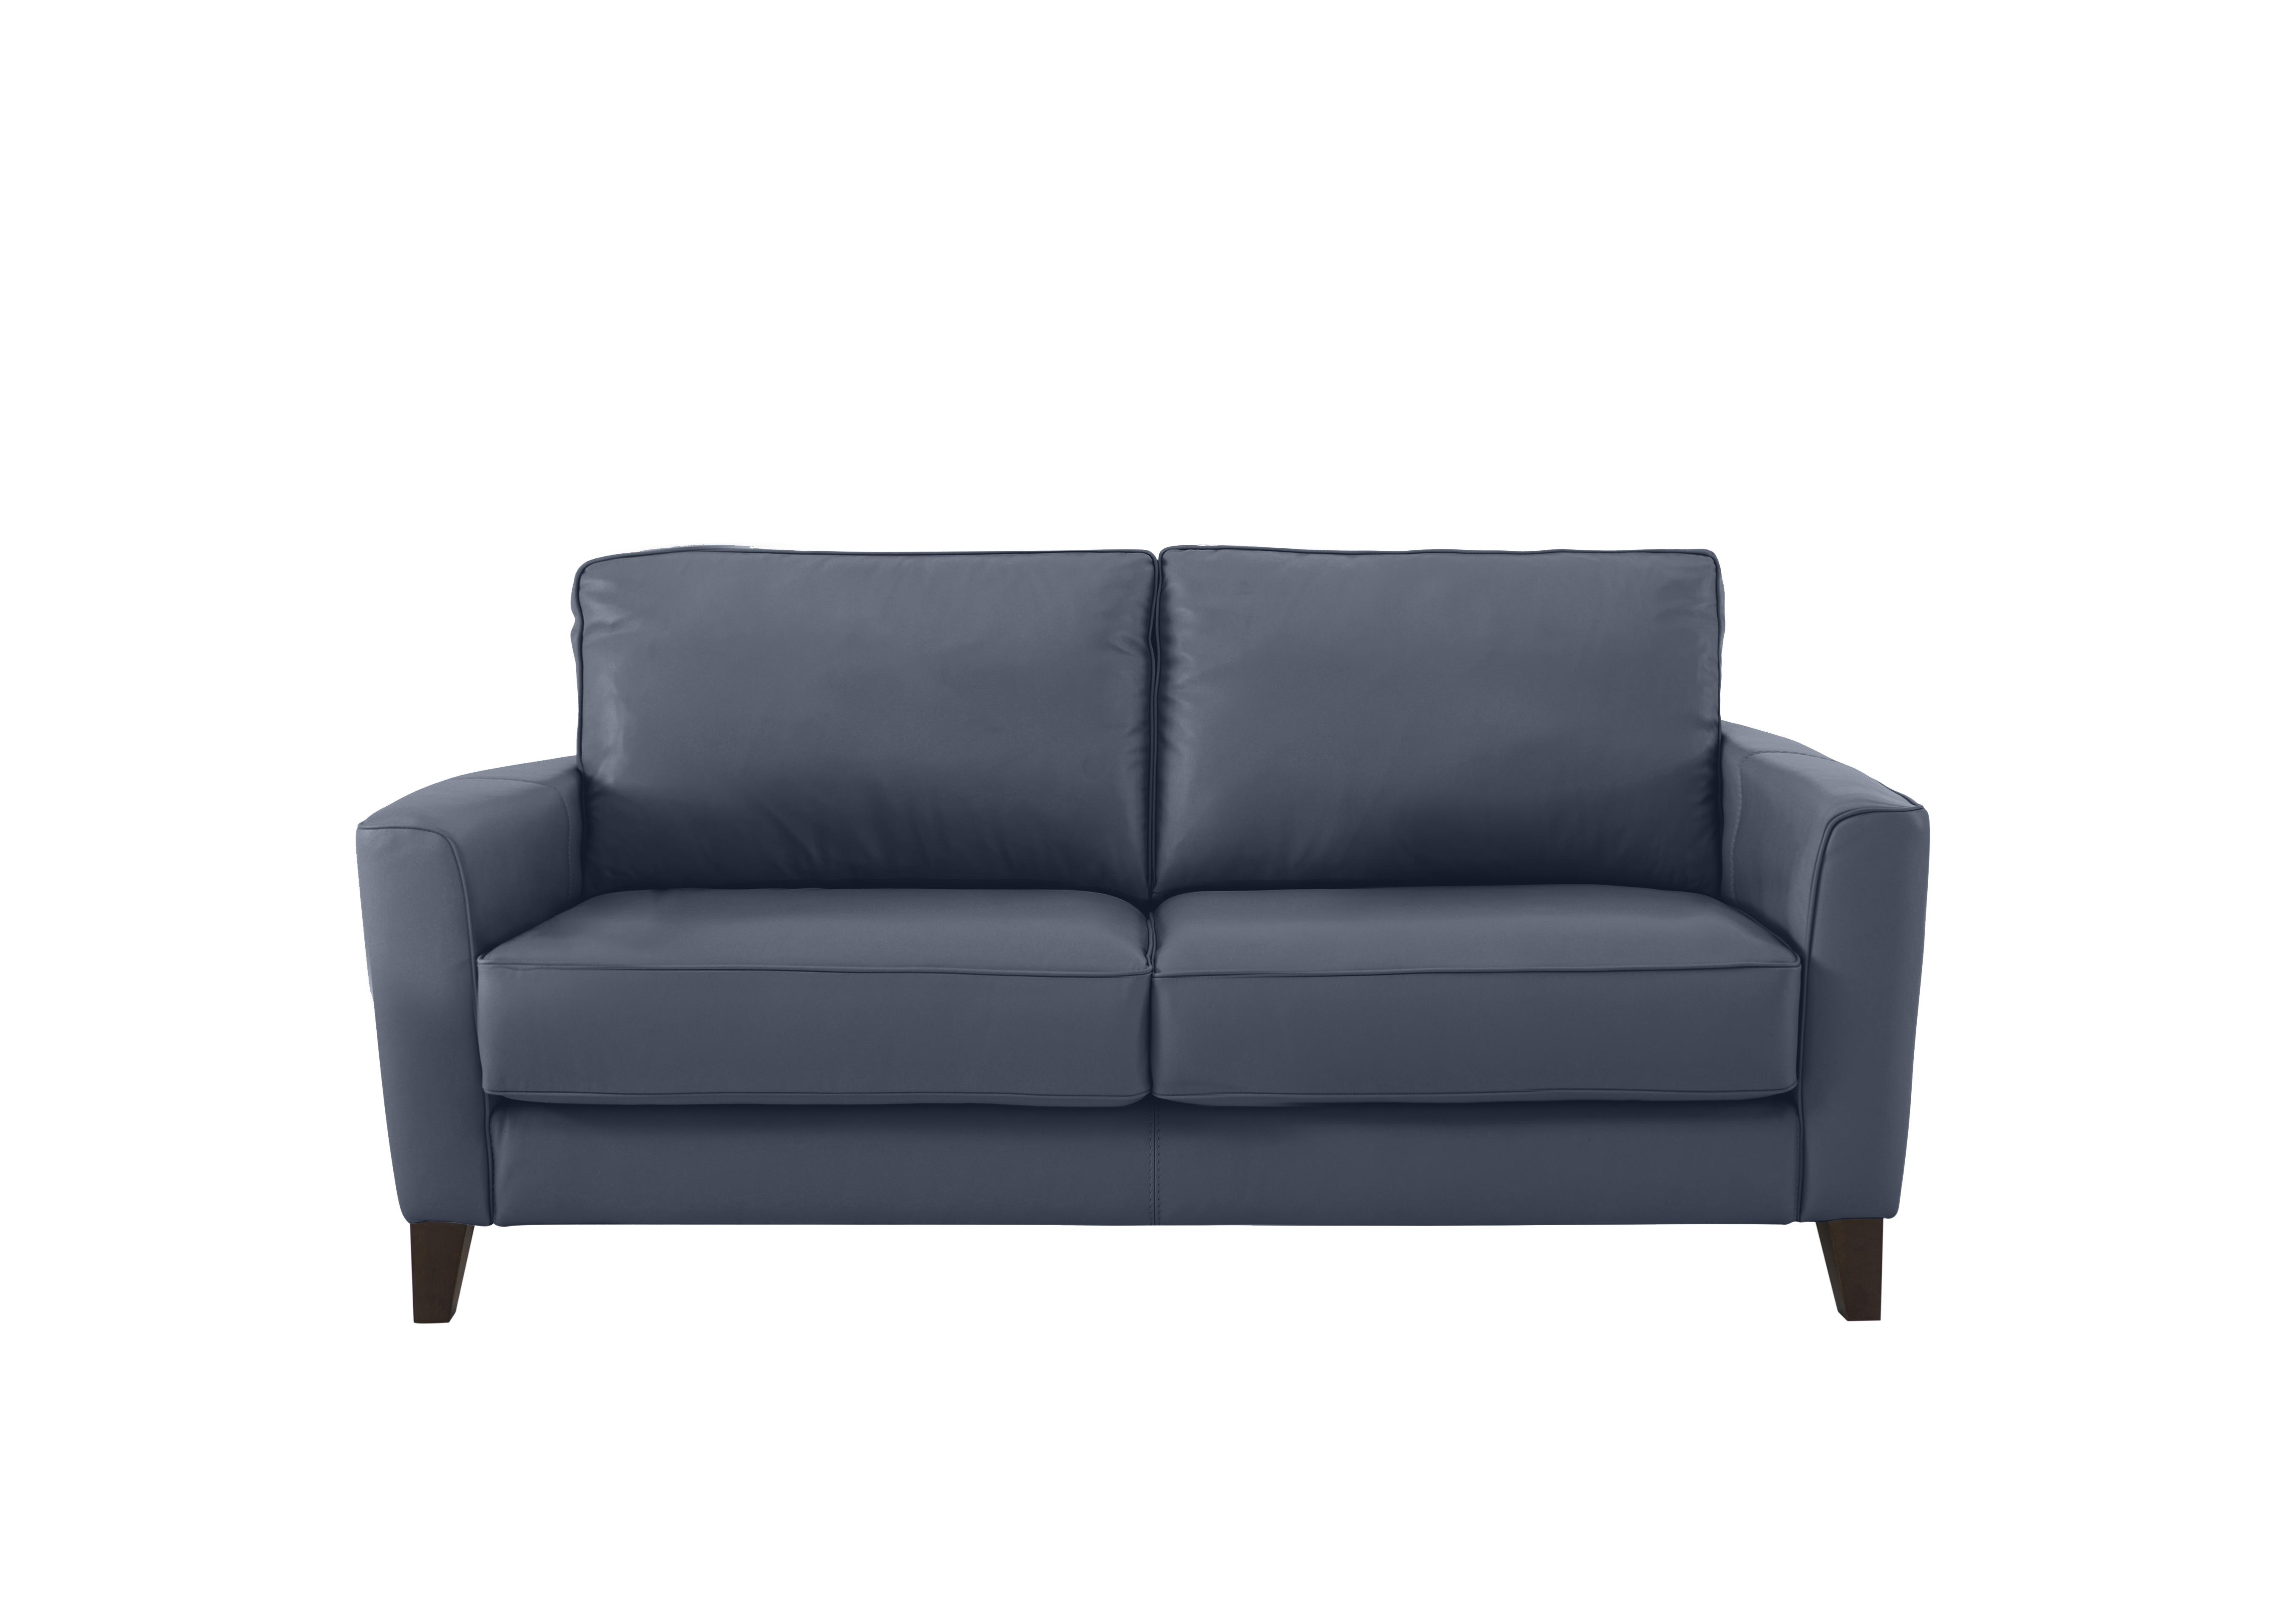 Brondby 2 Seater Leather Sofa in Bv-313e Ocean Blue on Furniture Village